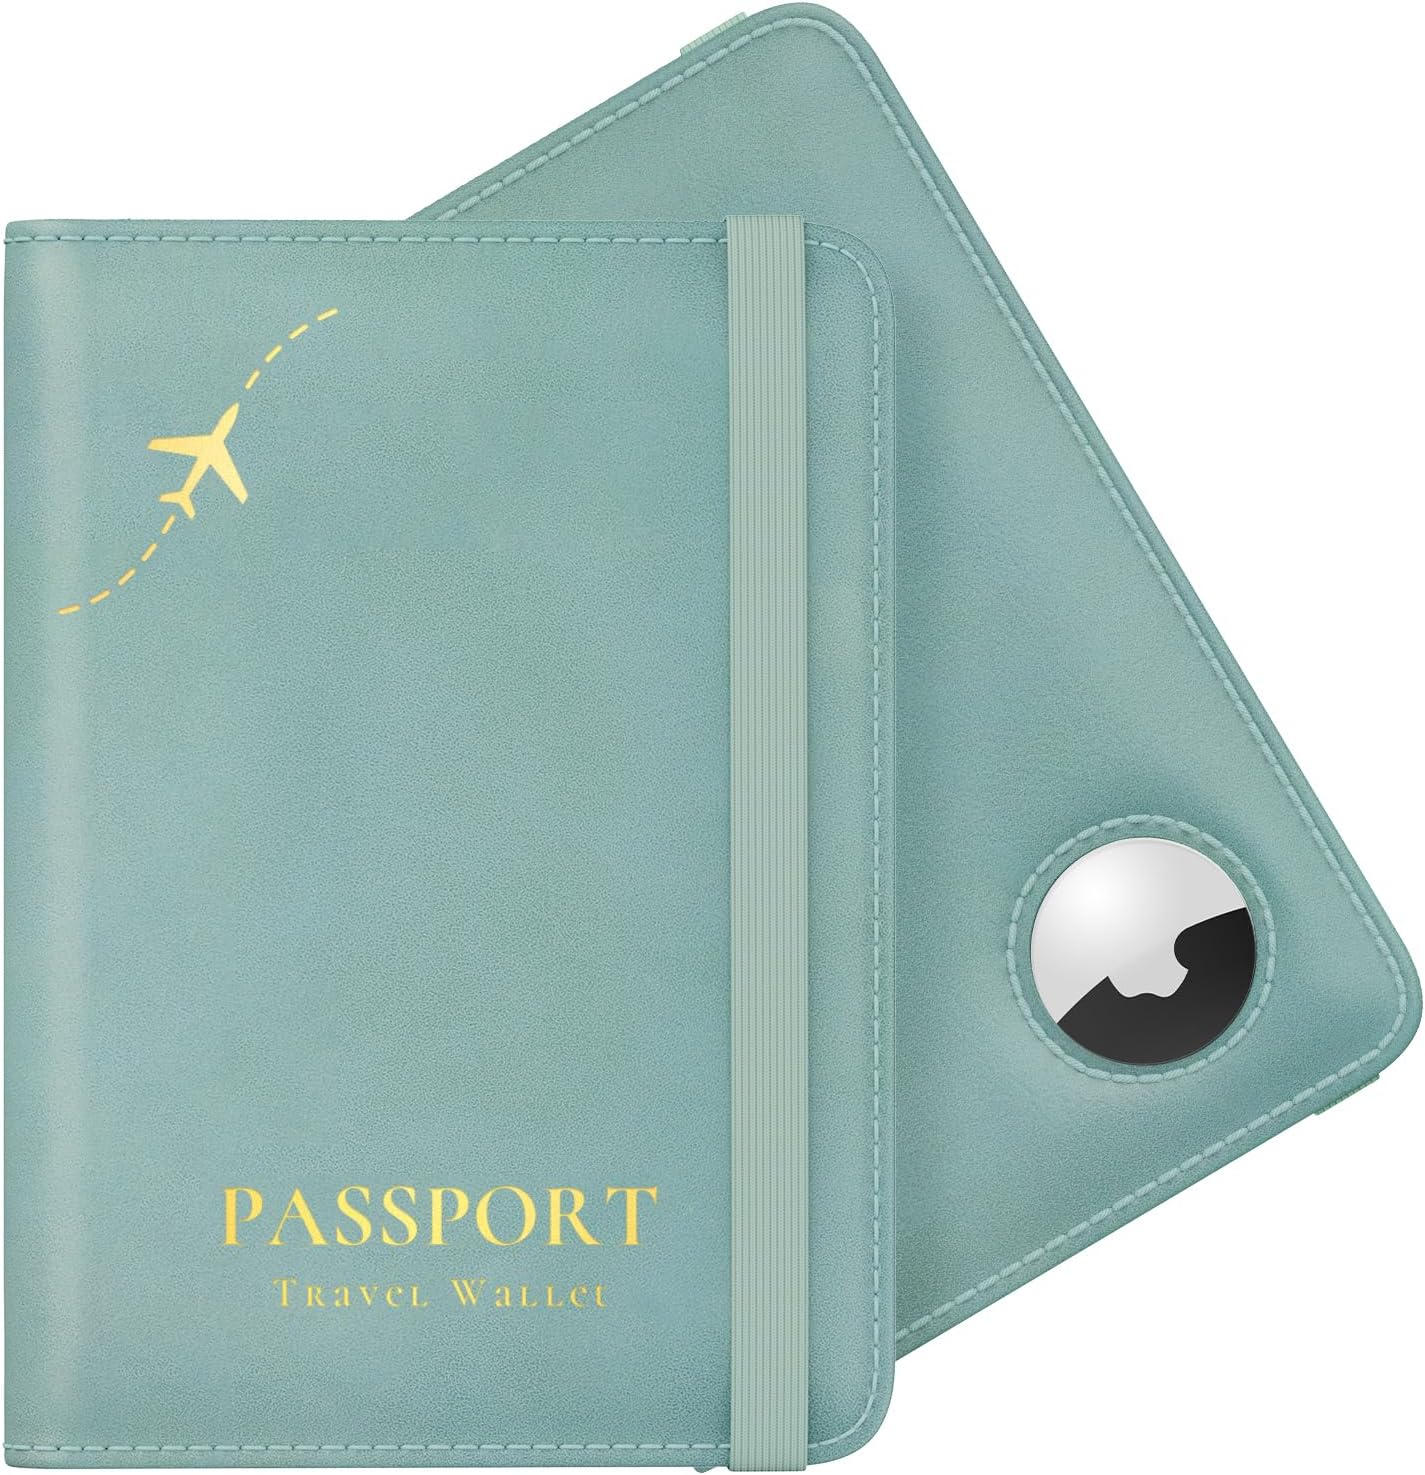 Passport Holder with Airtag Slot, Airtag Passport Wallet for Men, Slim Leather Passport Holder Case Family for Travel Anti - Lost, Green - Abbycart